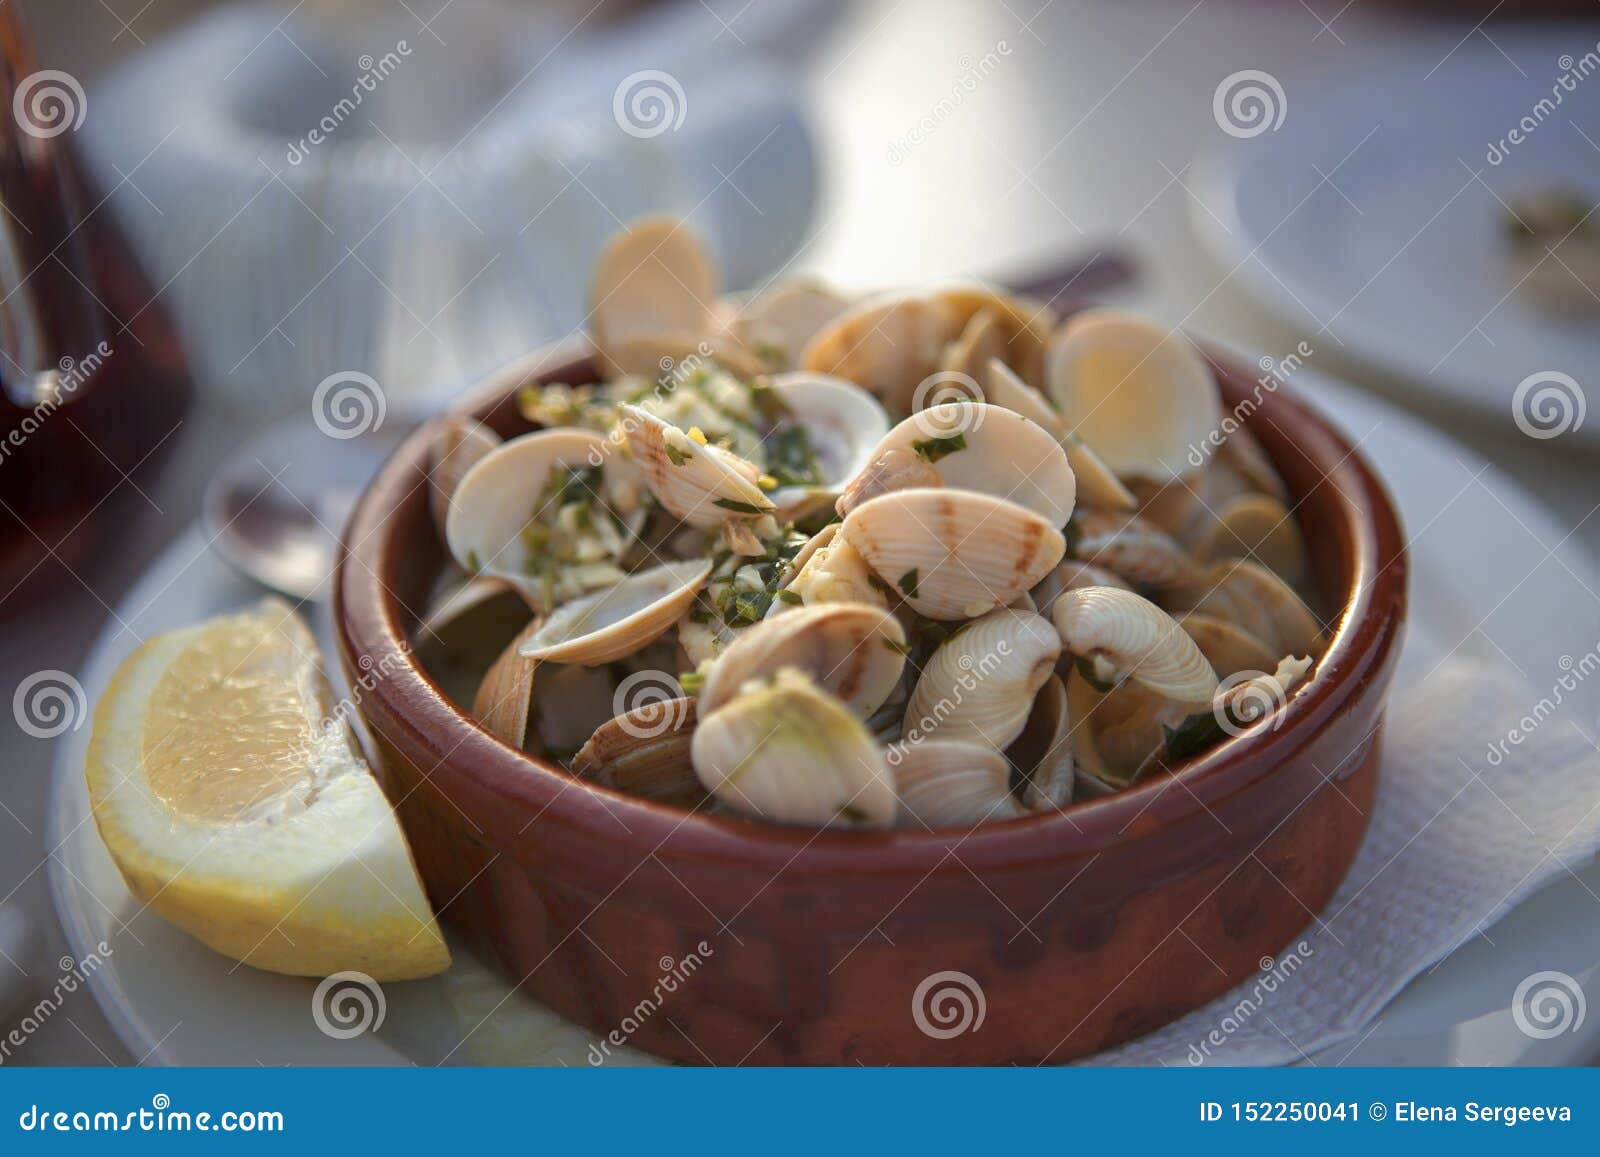 Dish with Hot Shells, Exotic Food Stock Image - Image of mussel ...